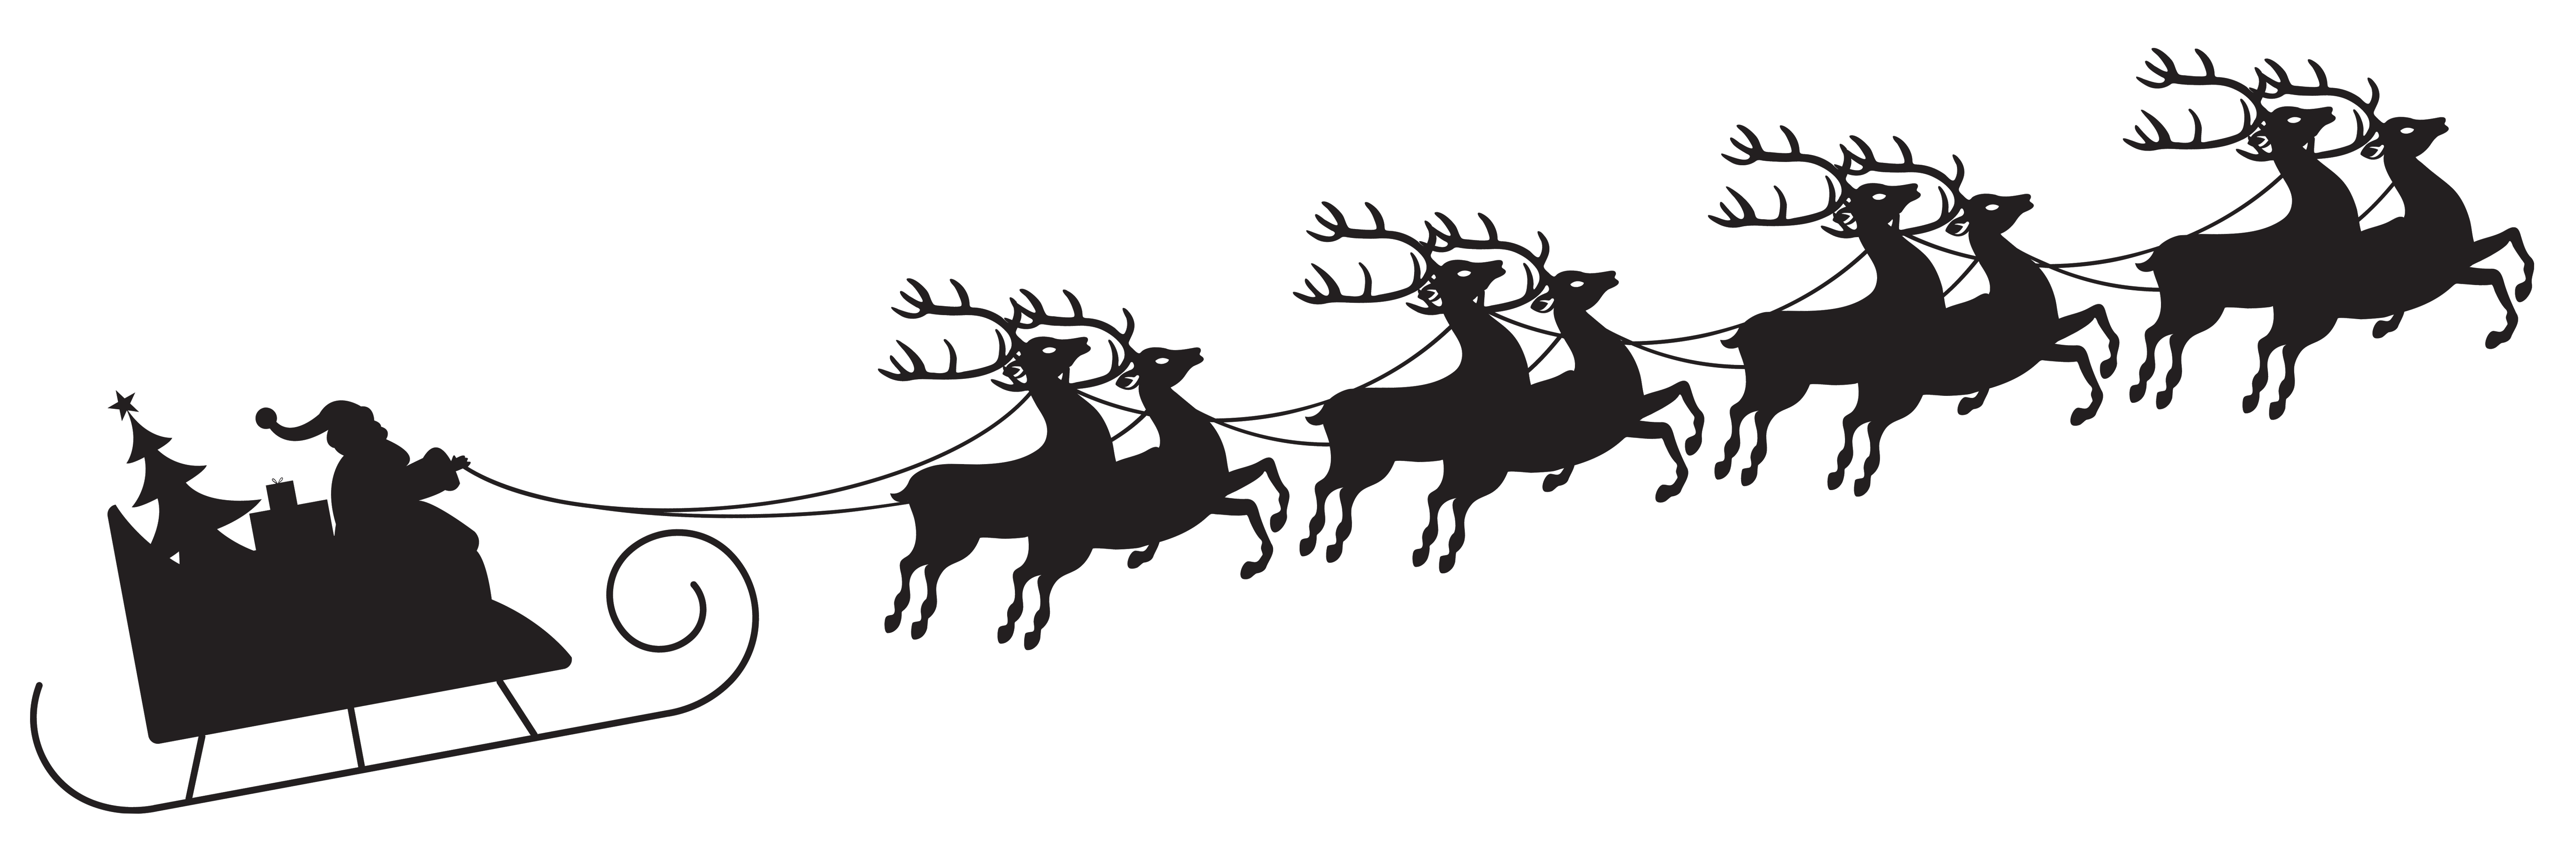 Silhouette of horse drawn. Manger clipart mantel